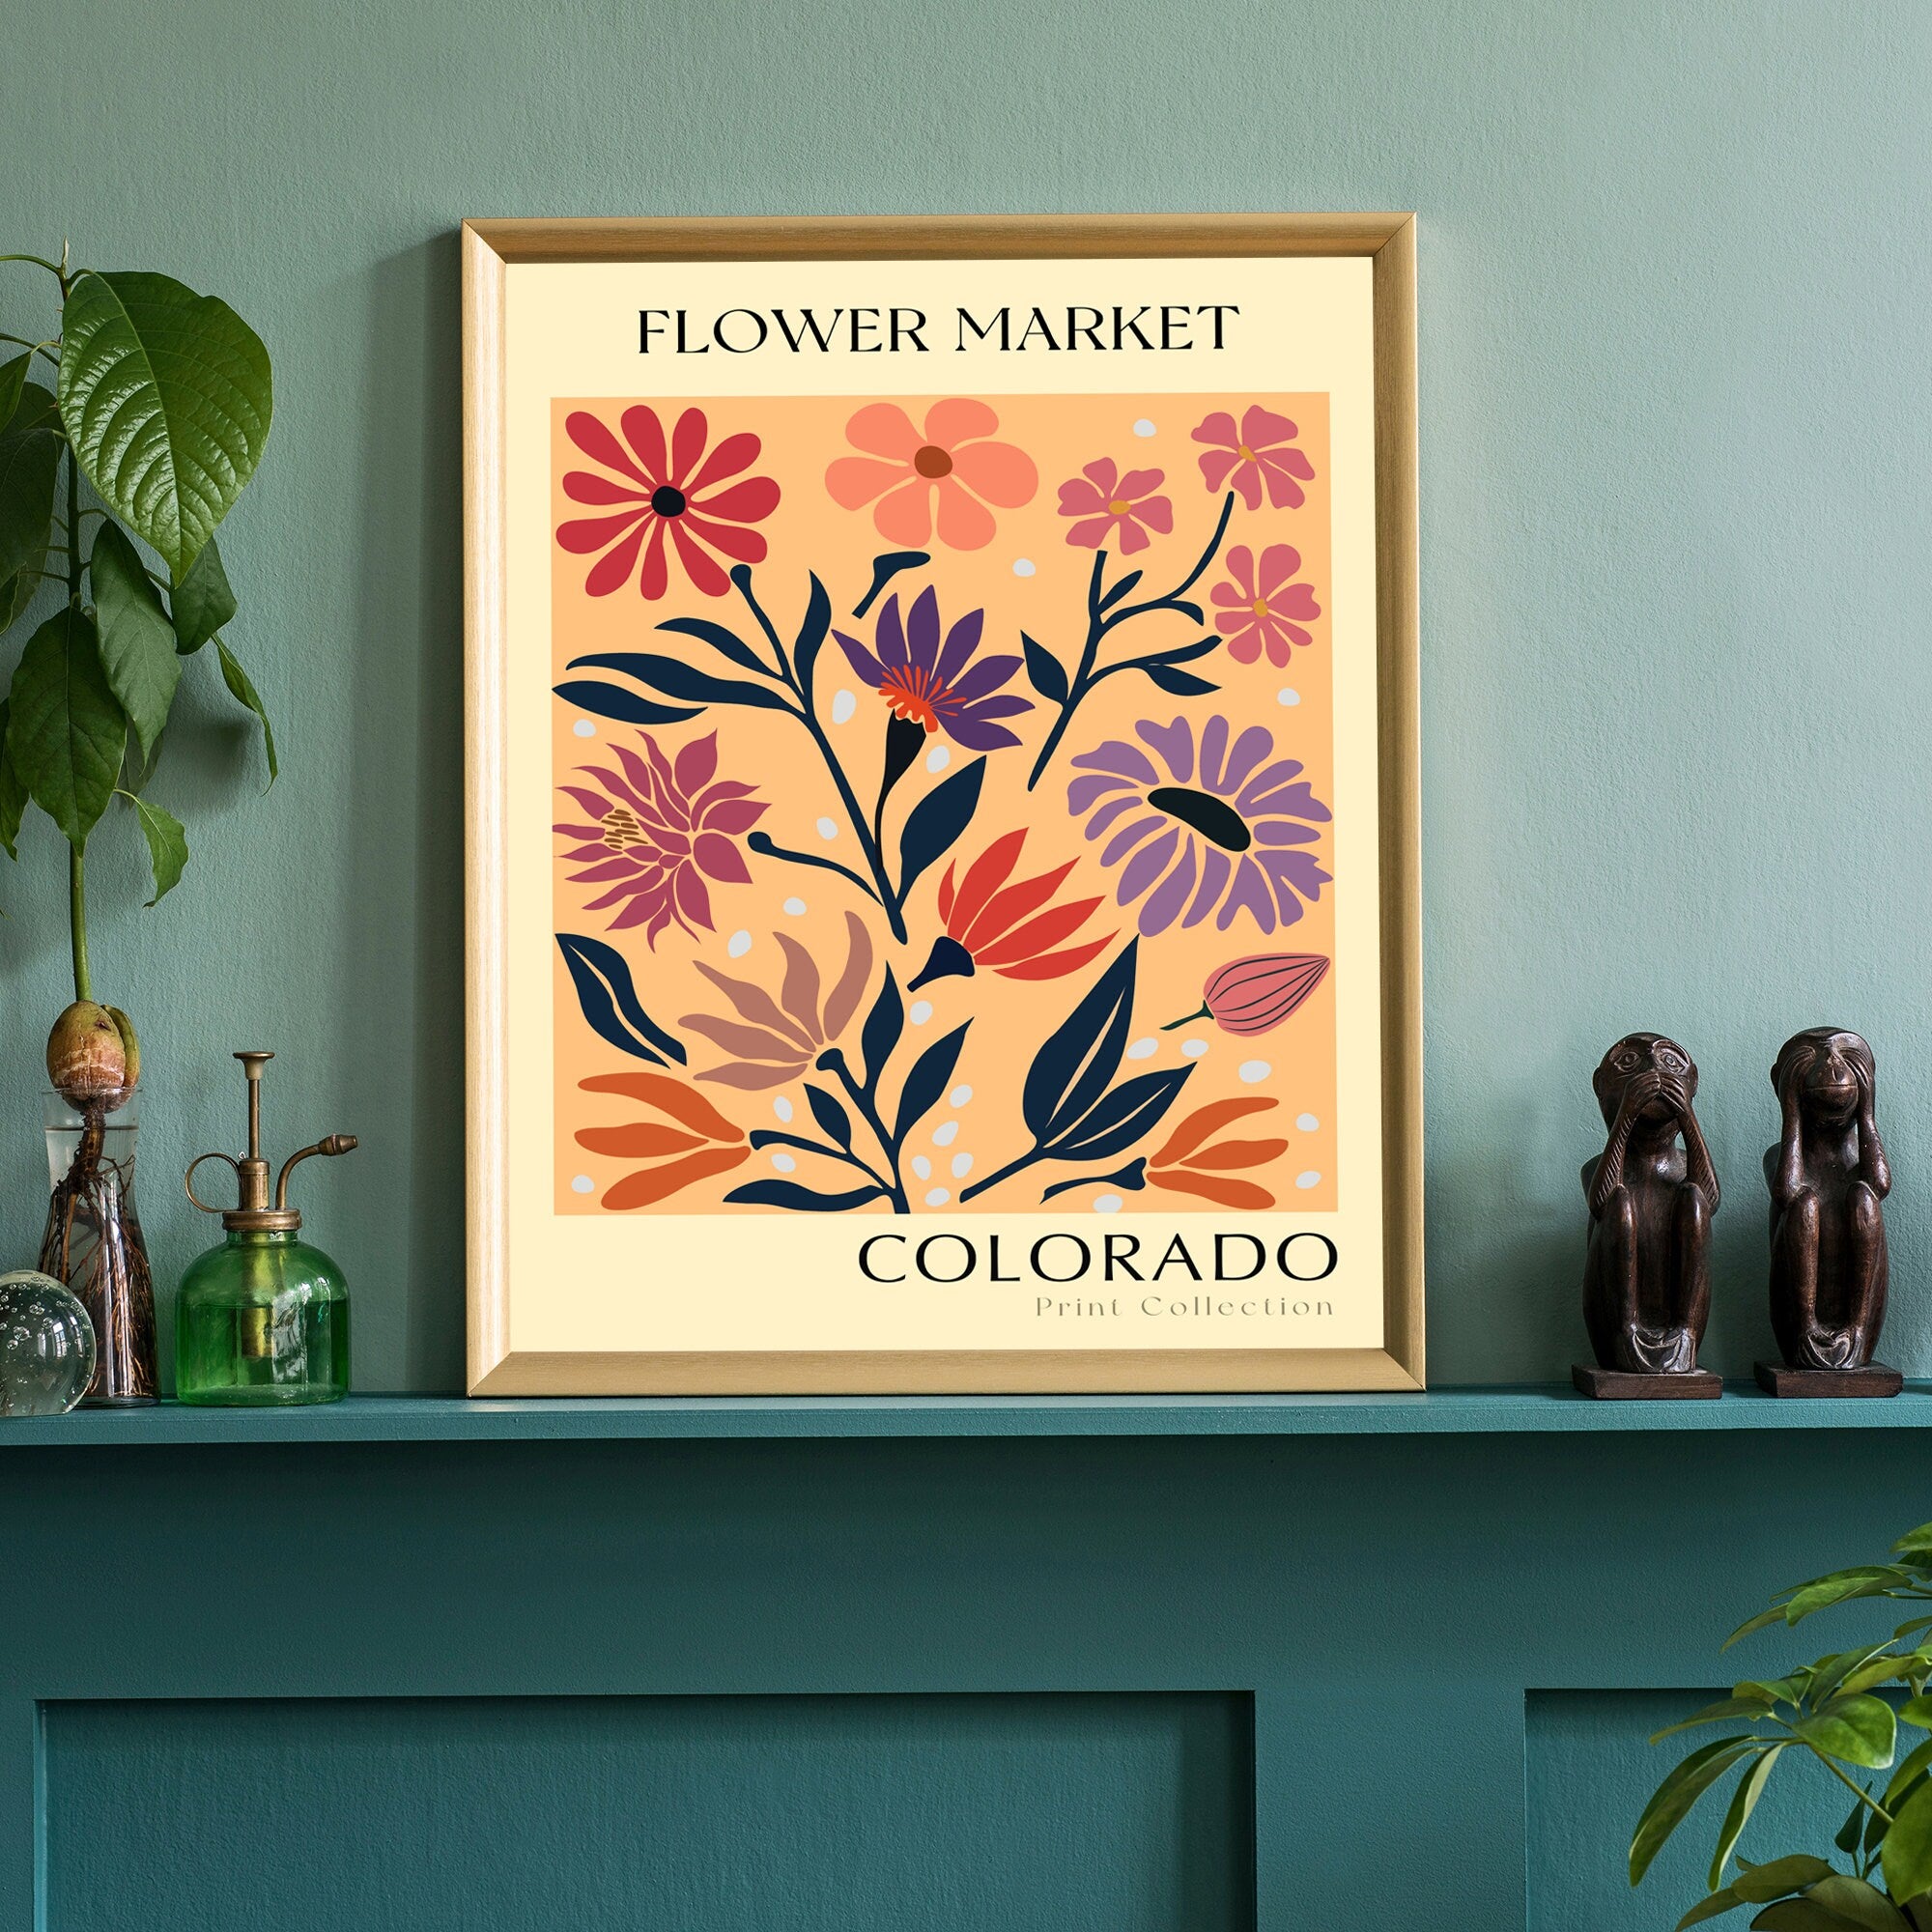 Colorado State flower print, States posters, Colorado flower market poster, Botanical posters, Natural poster artwork, Boho floral wall art